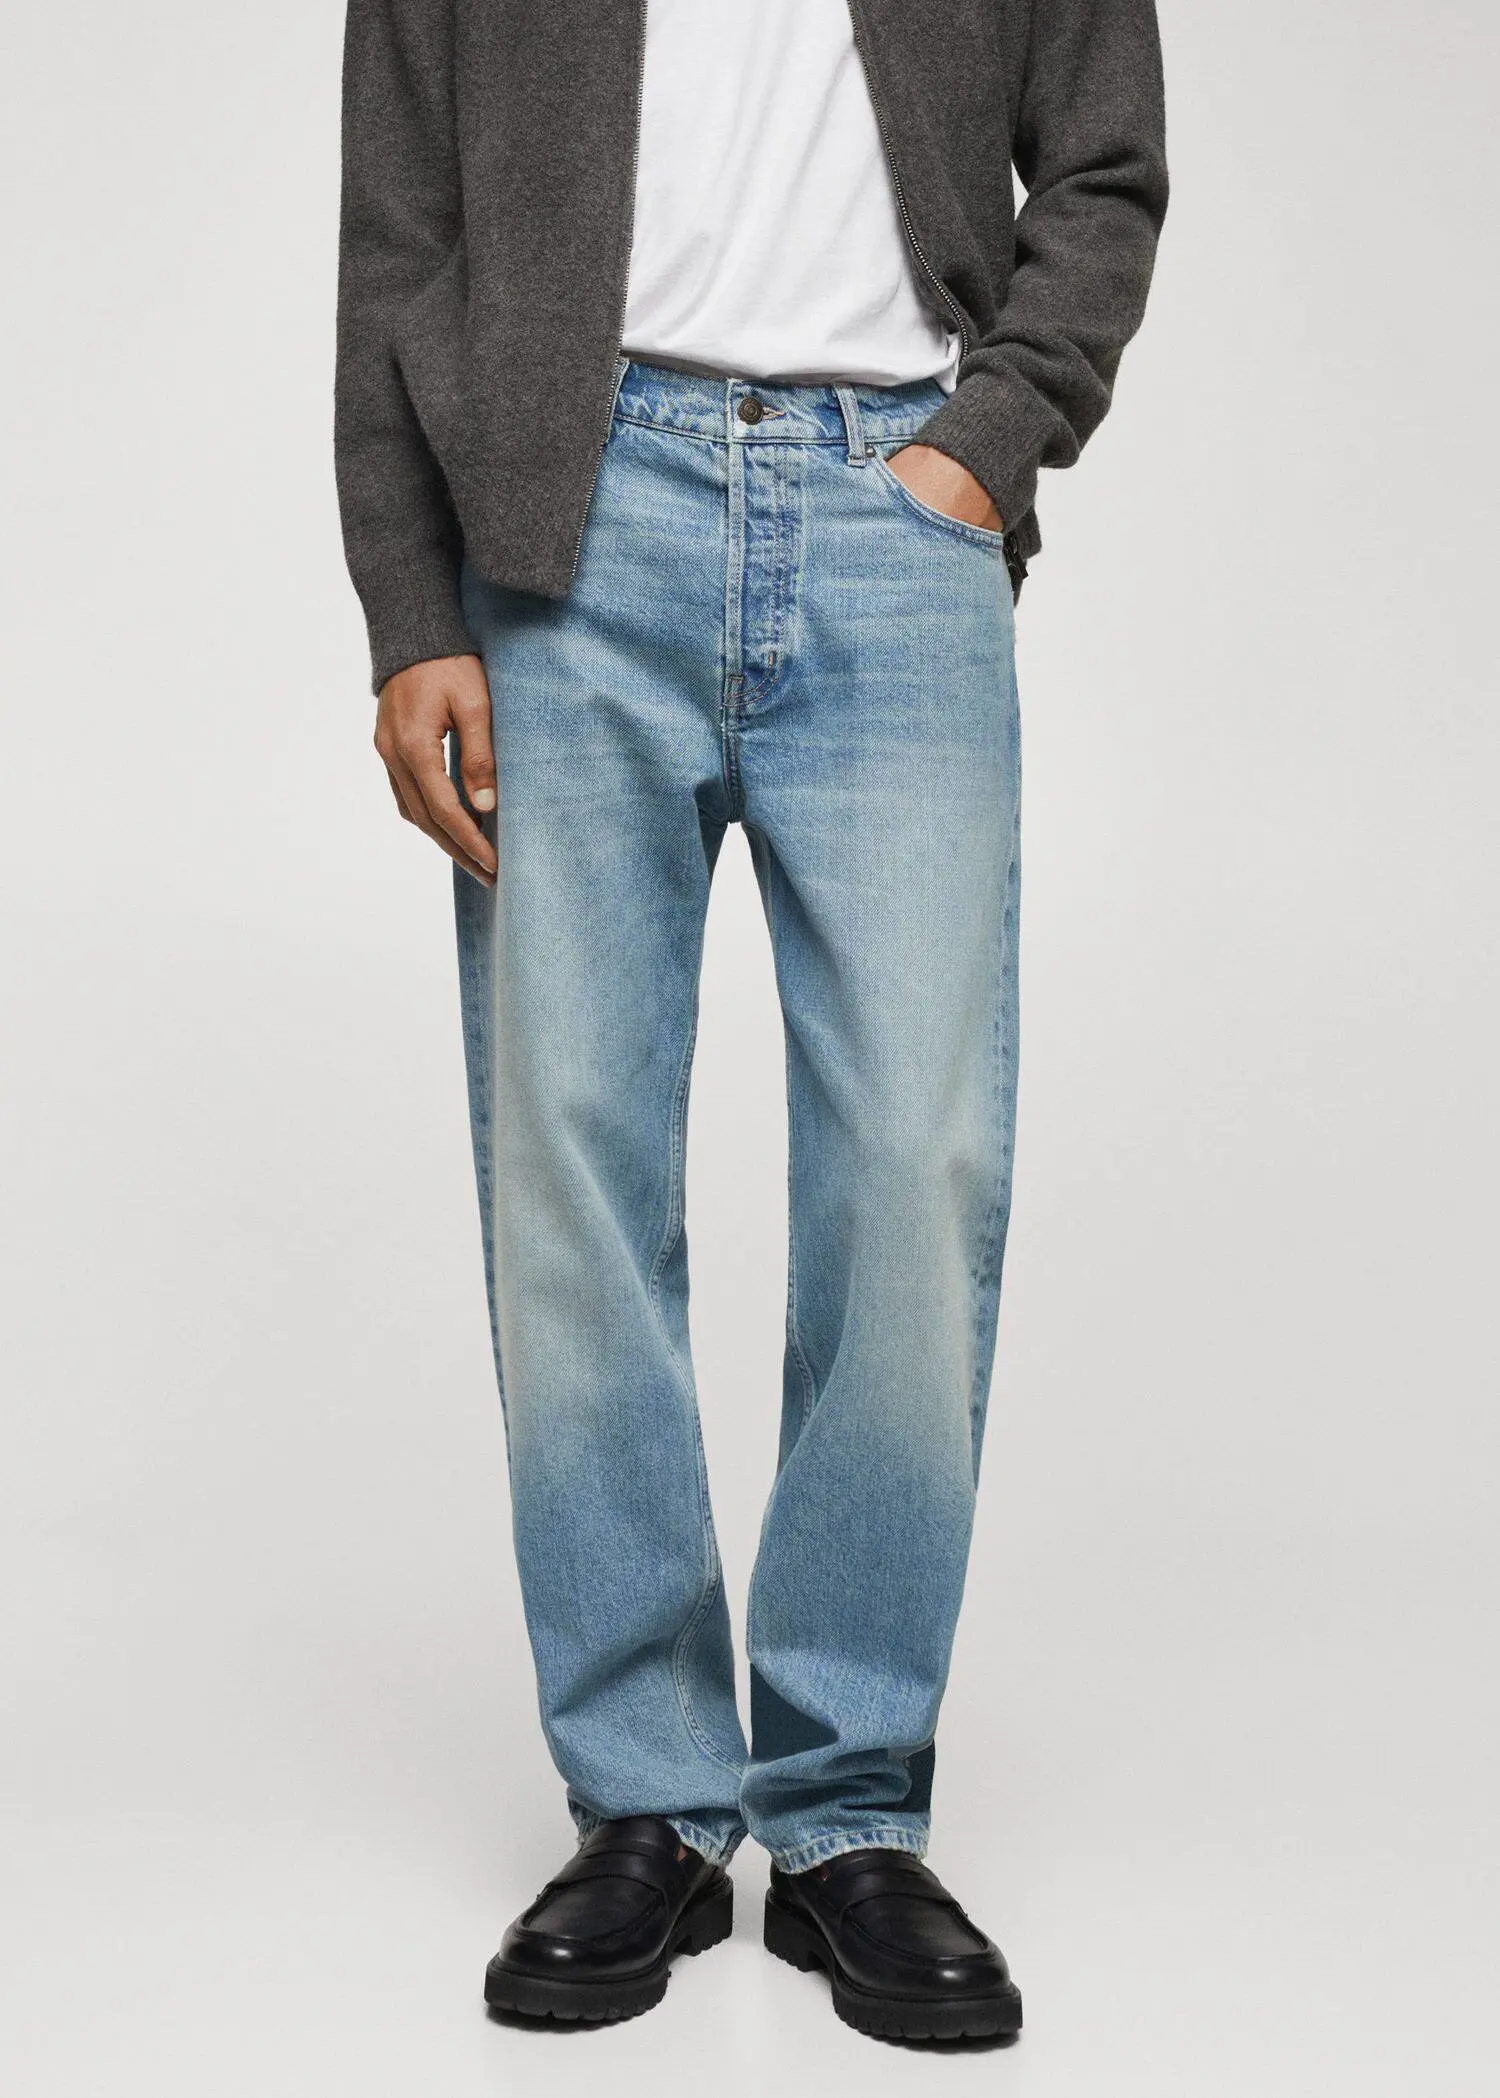 Mango Jeans relaxed fit lavado medio. 2